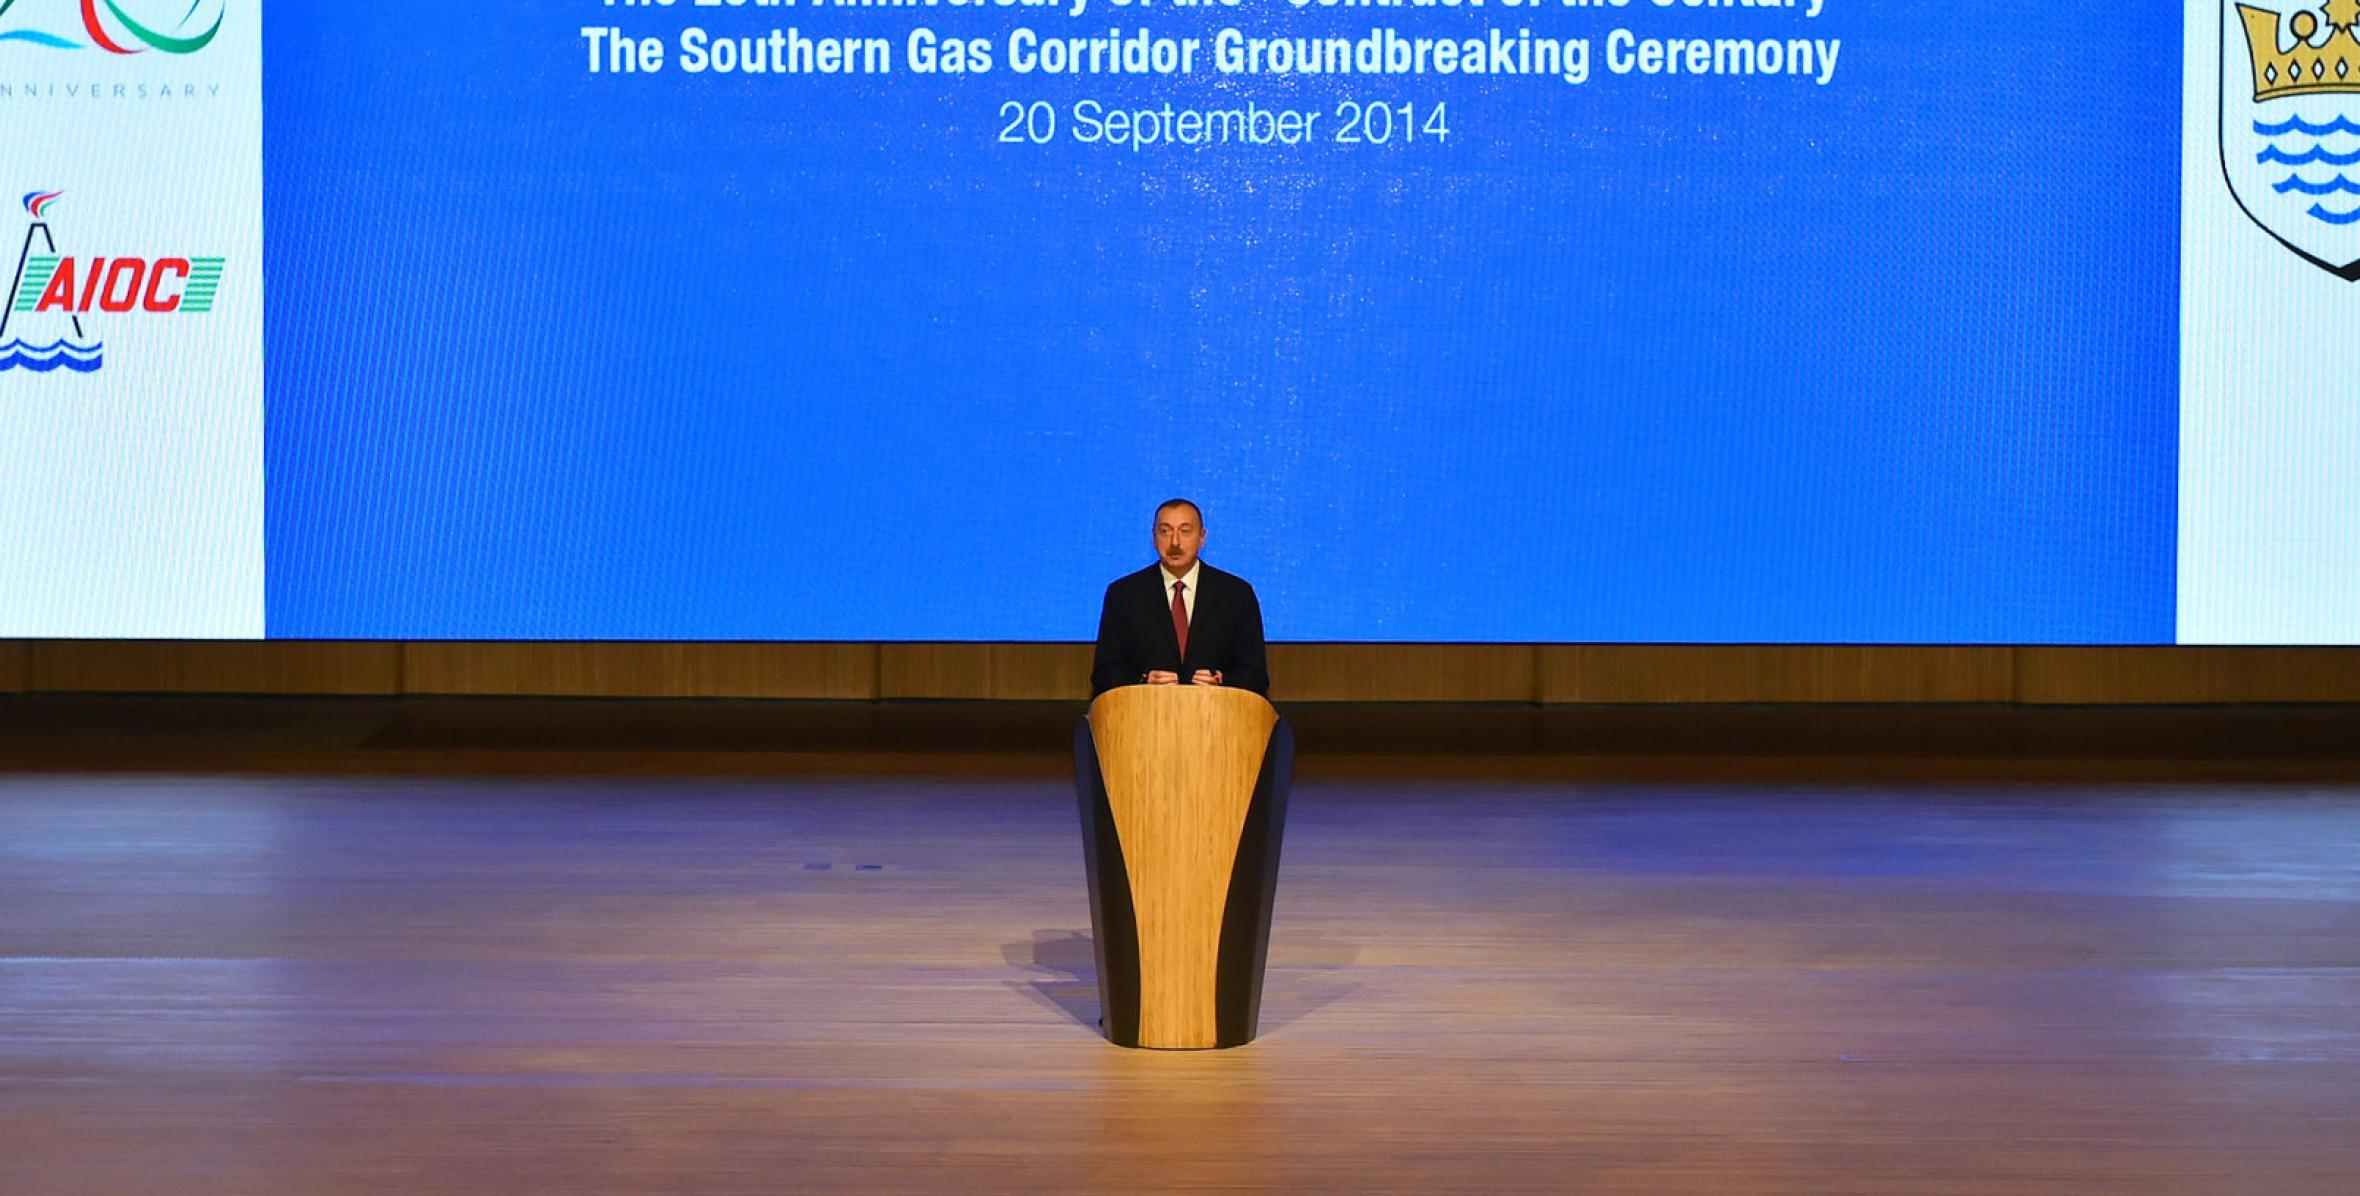 Speech by Ilham Aliyev at the ceremony to mark the 20th anniversary of the Contract of the Century and the foundation of the Southern Gas Corridor